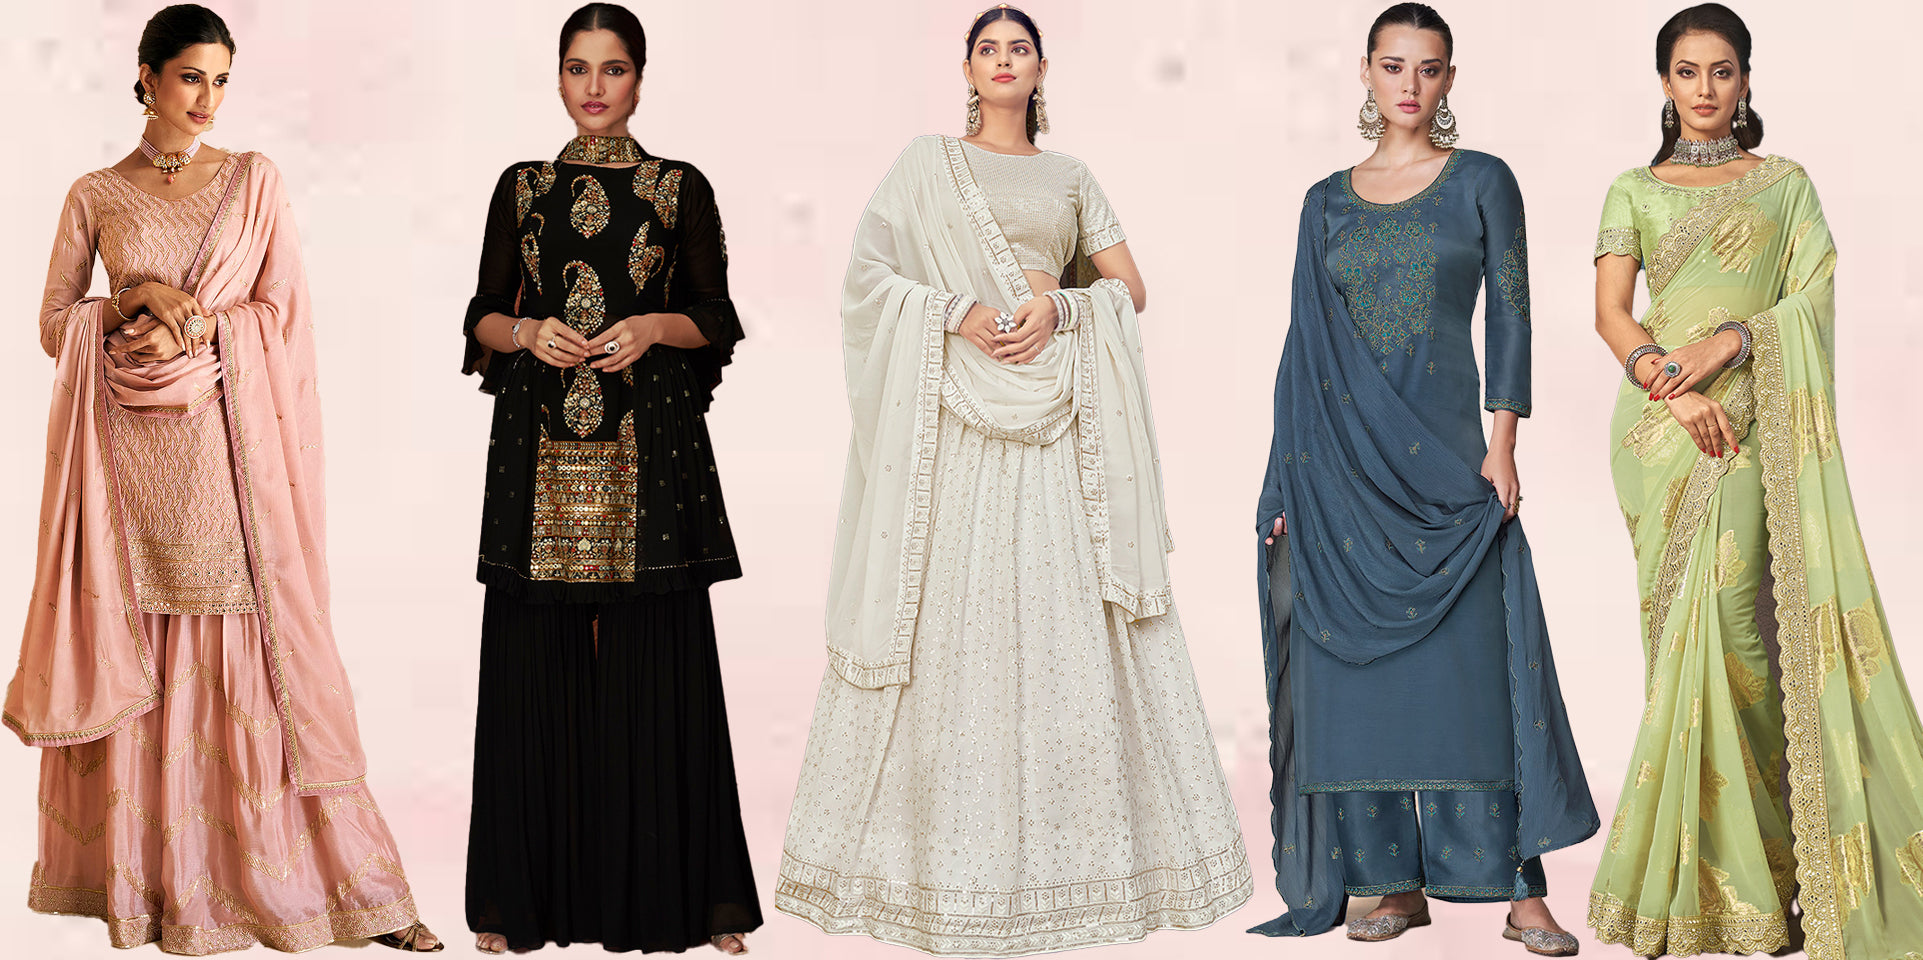 Best India Clothing Website for Diwali Shopping in USA, UK, Canada and Worldwide